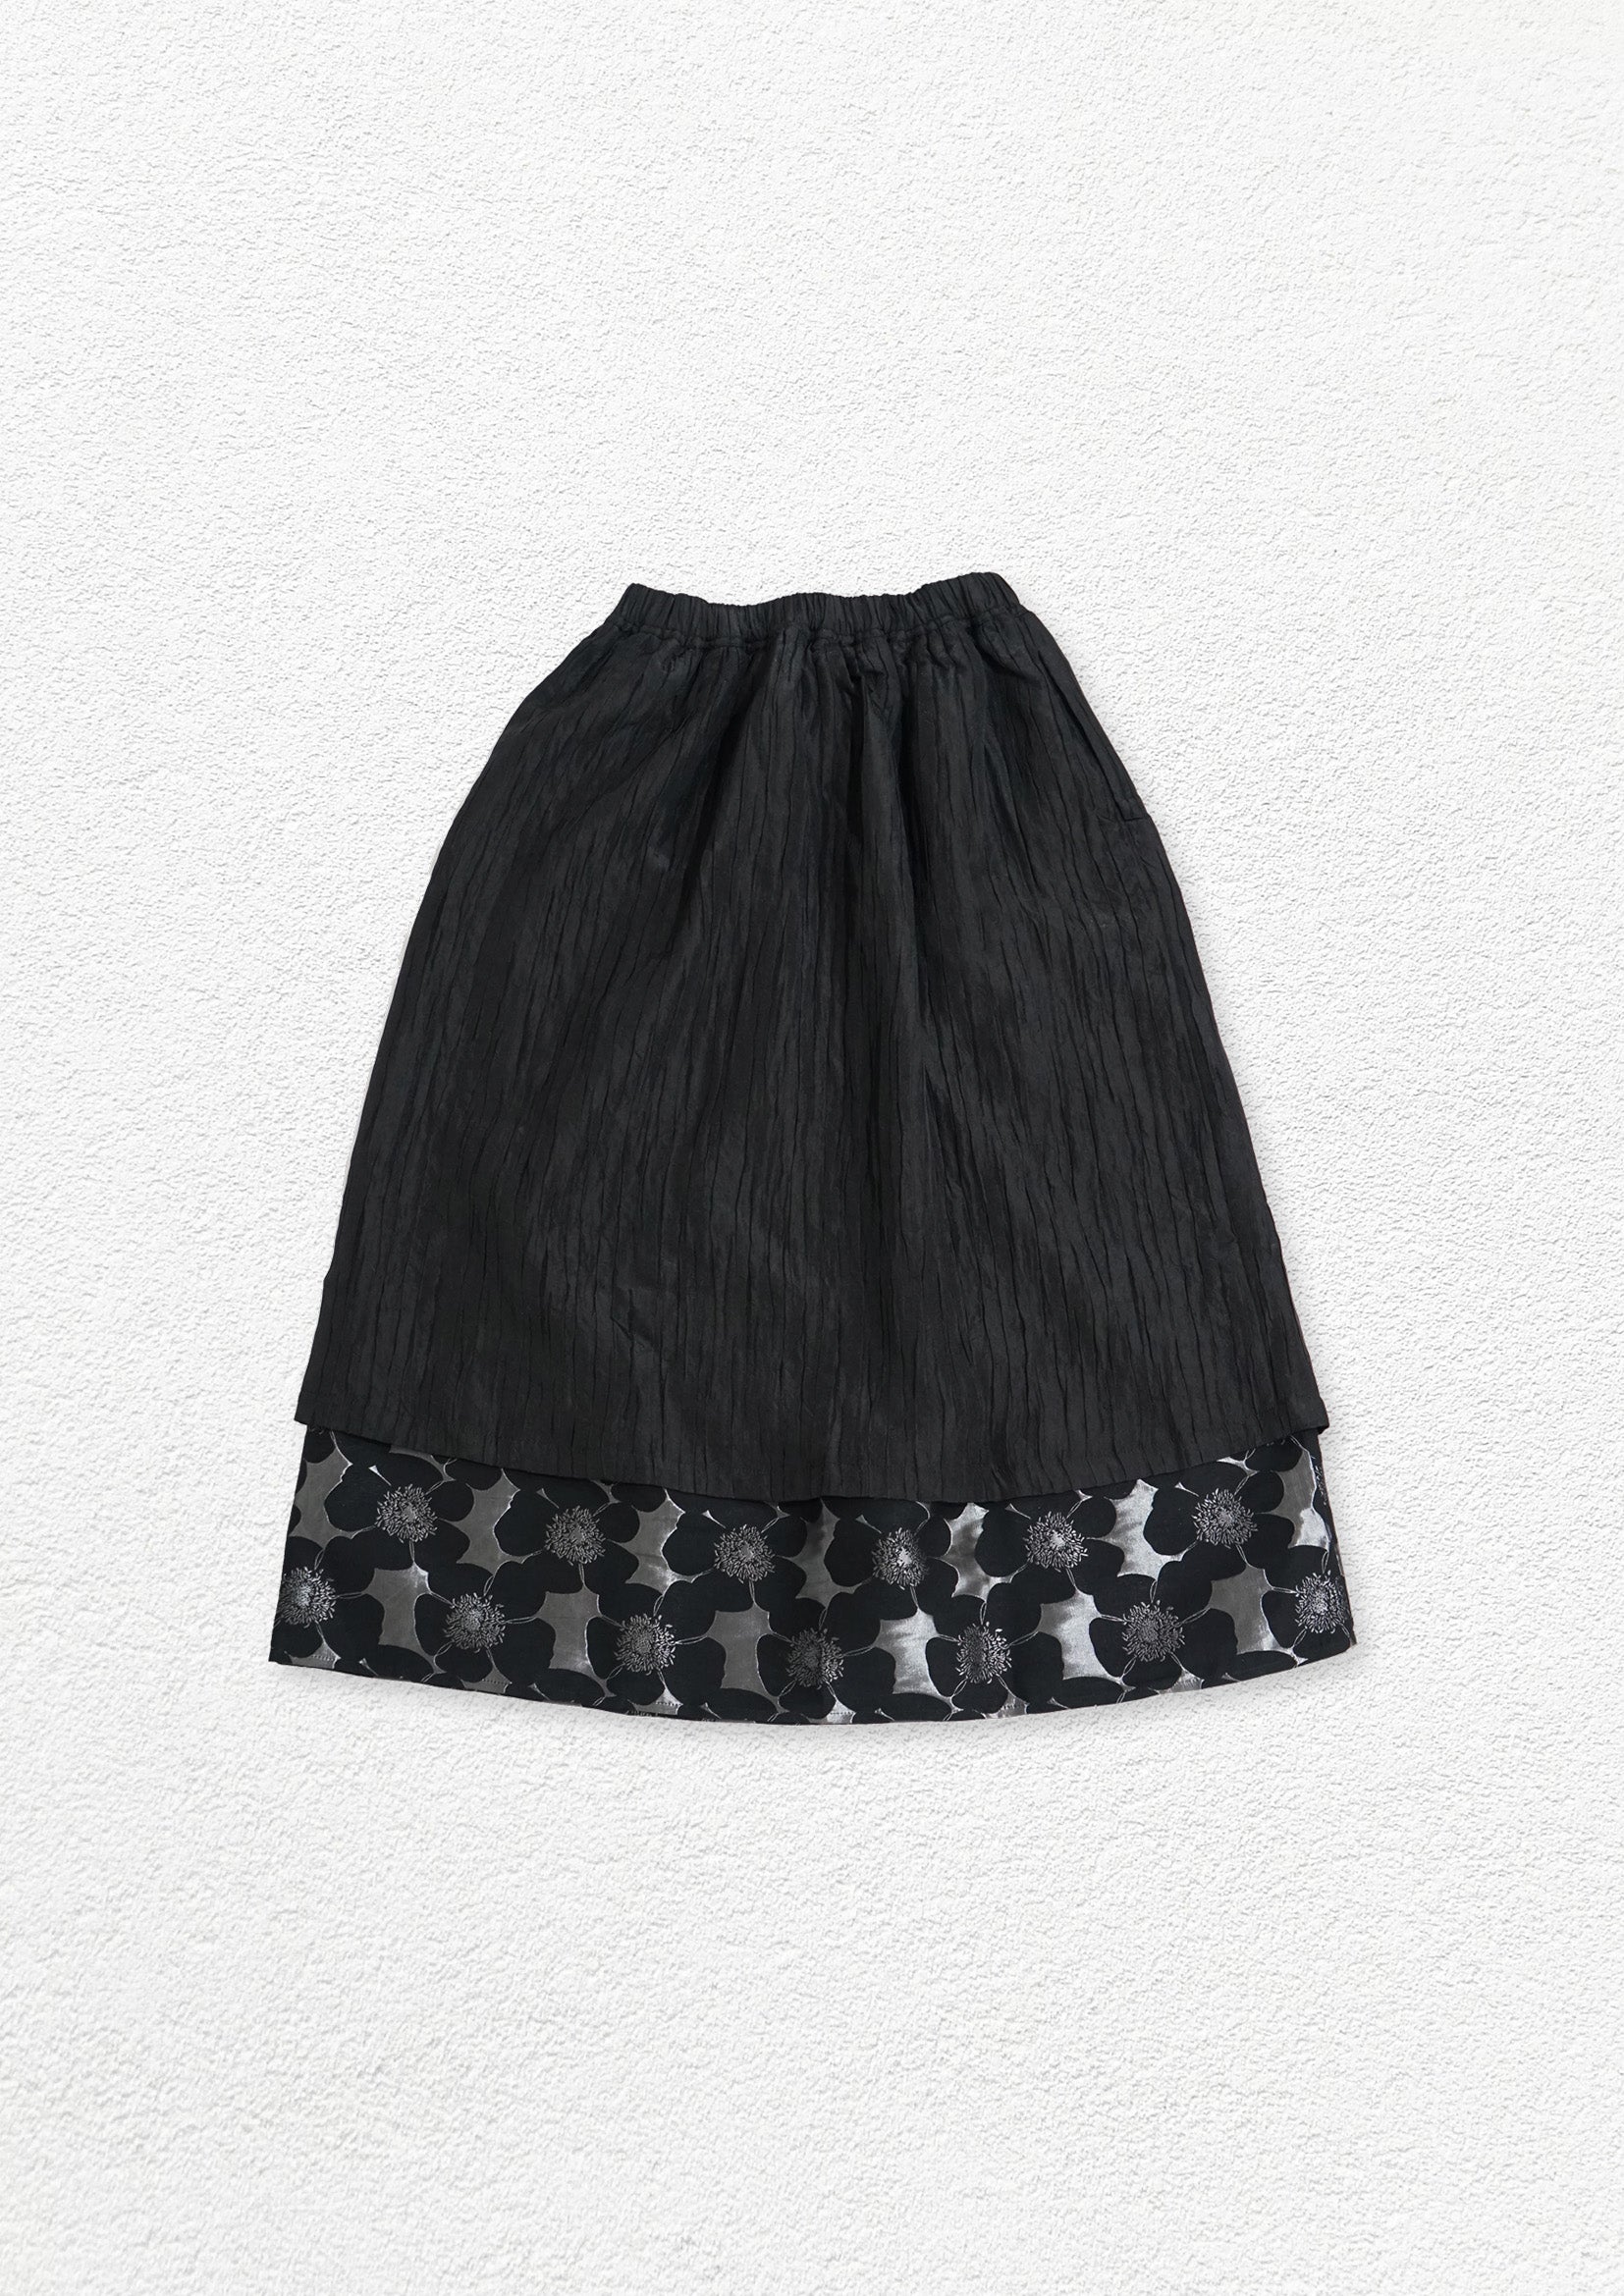 Double layer textured floral skirt - black